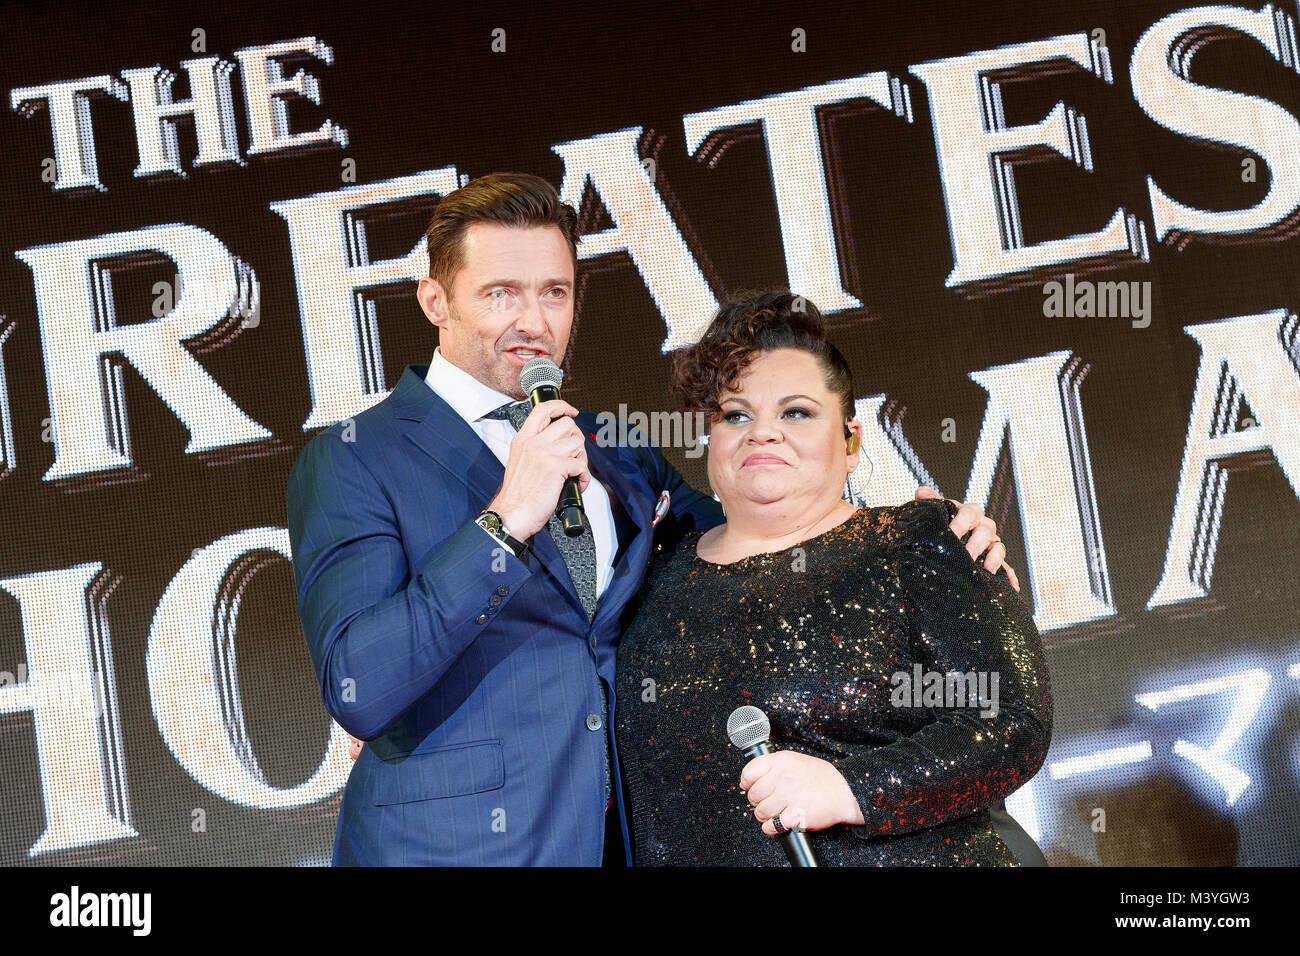 Tokyo, Japan. 13th Feb, 2018. (L to R) Australian actor Hugh Jackman and American actress/singer Keala Settle, speak during a special red carpet event for the film ''The Greatest Showman'' on February 13, 2018, Tokyo, Japan. The Japanese musical movie directed by Michael Gracey will be released in Japan on February 16. Credit: Rodrigo Reyes Marin/AFLO/Alamy Live News Stock Photo